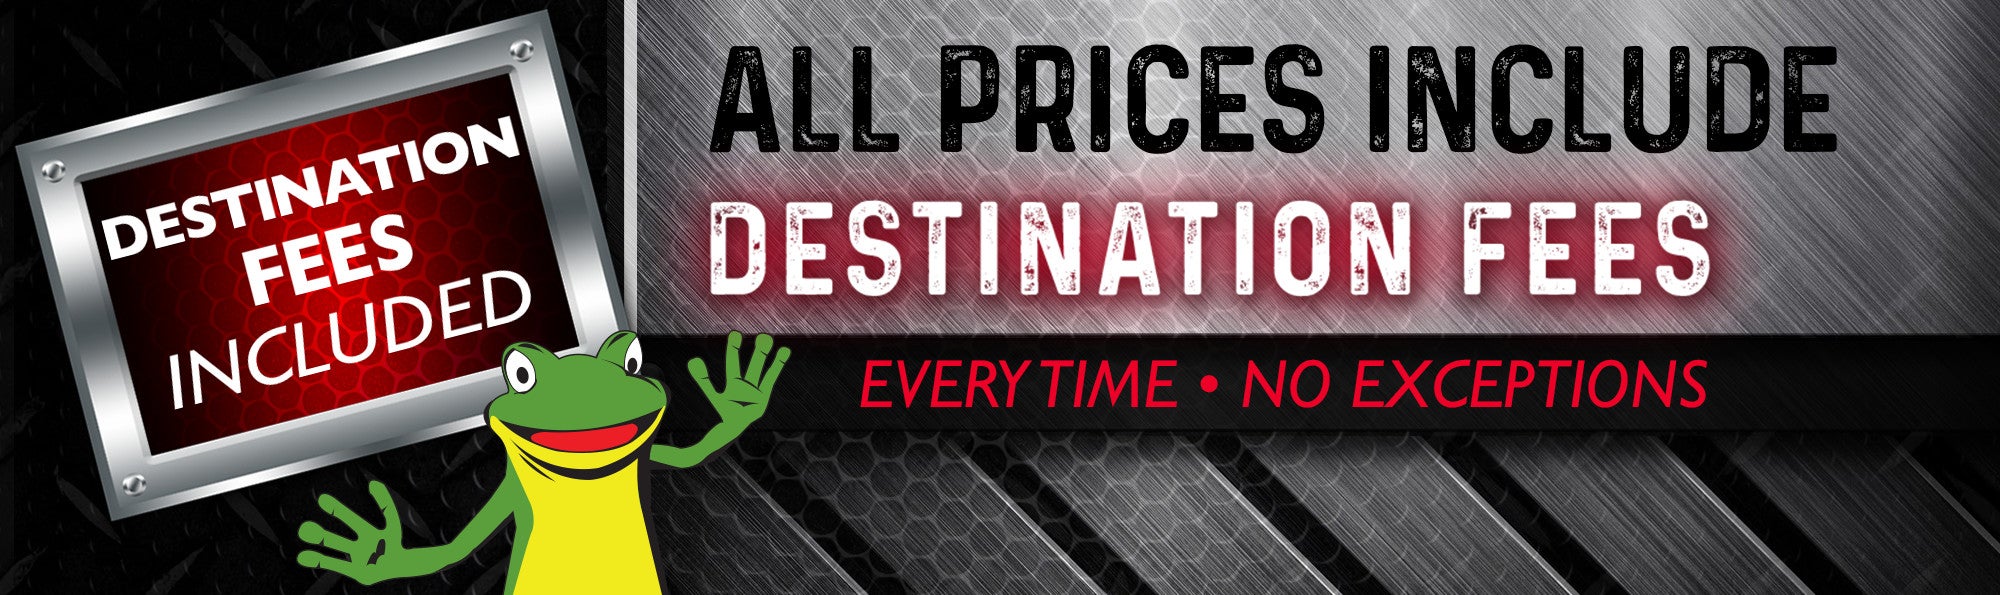 Destination Fees at Preston Ford Commercial Vehicle Center in Hurlock MD